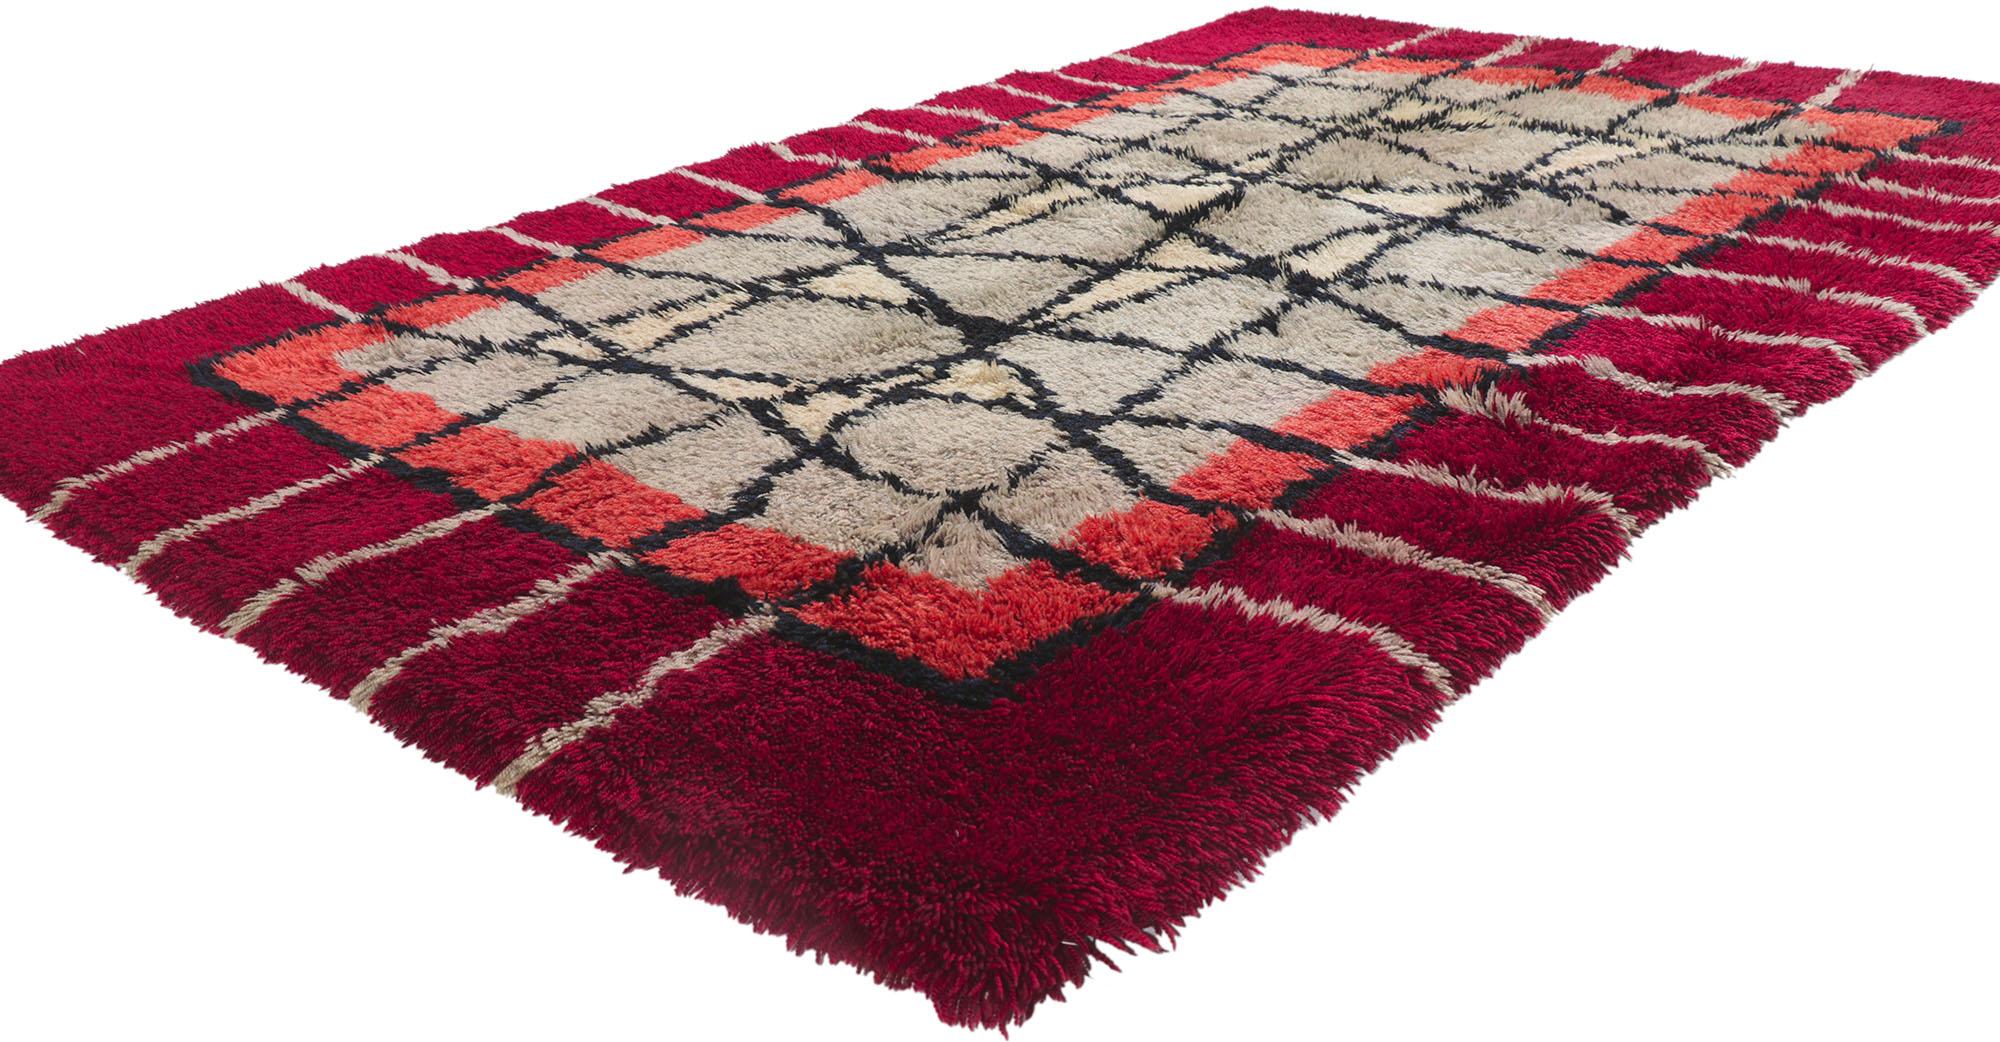 78278 Vintage Swedish Rya rug with Scandinavian Modern style 04'04 x 06'10. Full of tiny details and a bold expressive design combined with folk art tribal style, this hand-knotted wool vintage Swedish Ryijy Rya rug is a captivating vision of woven